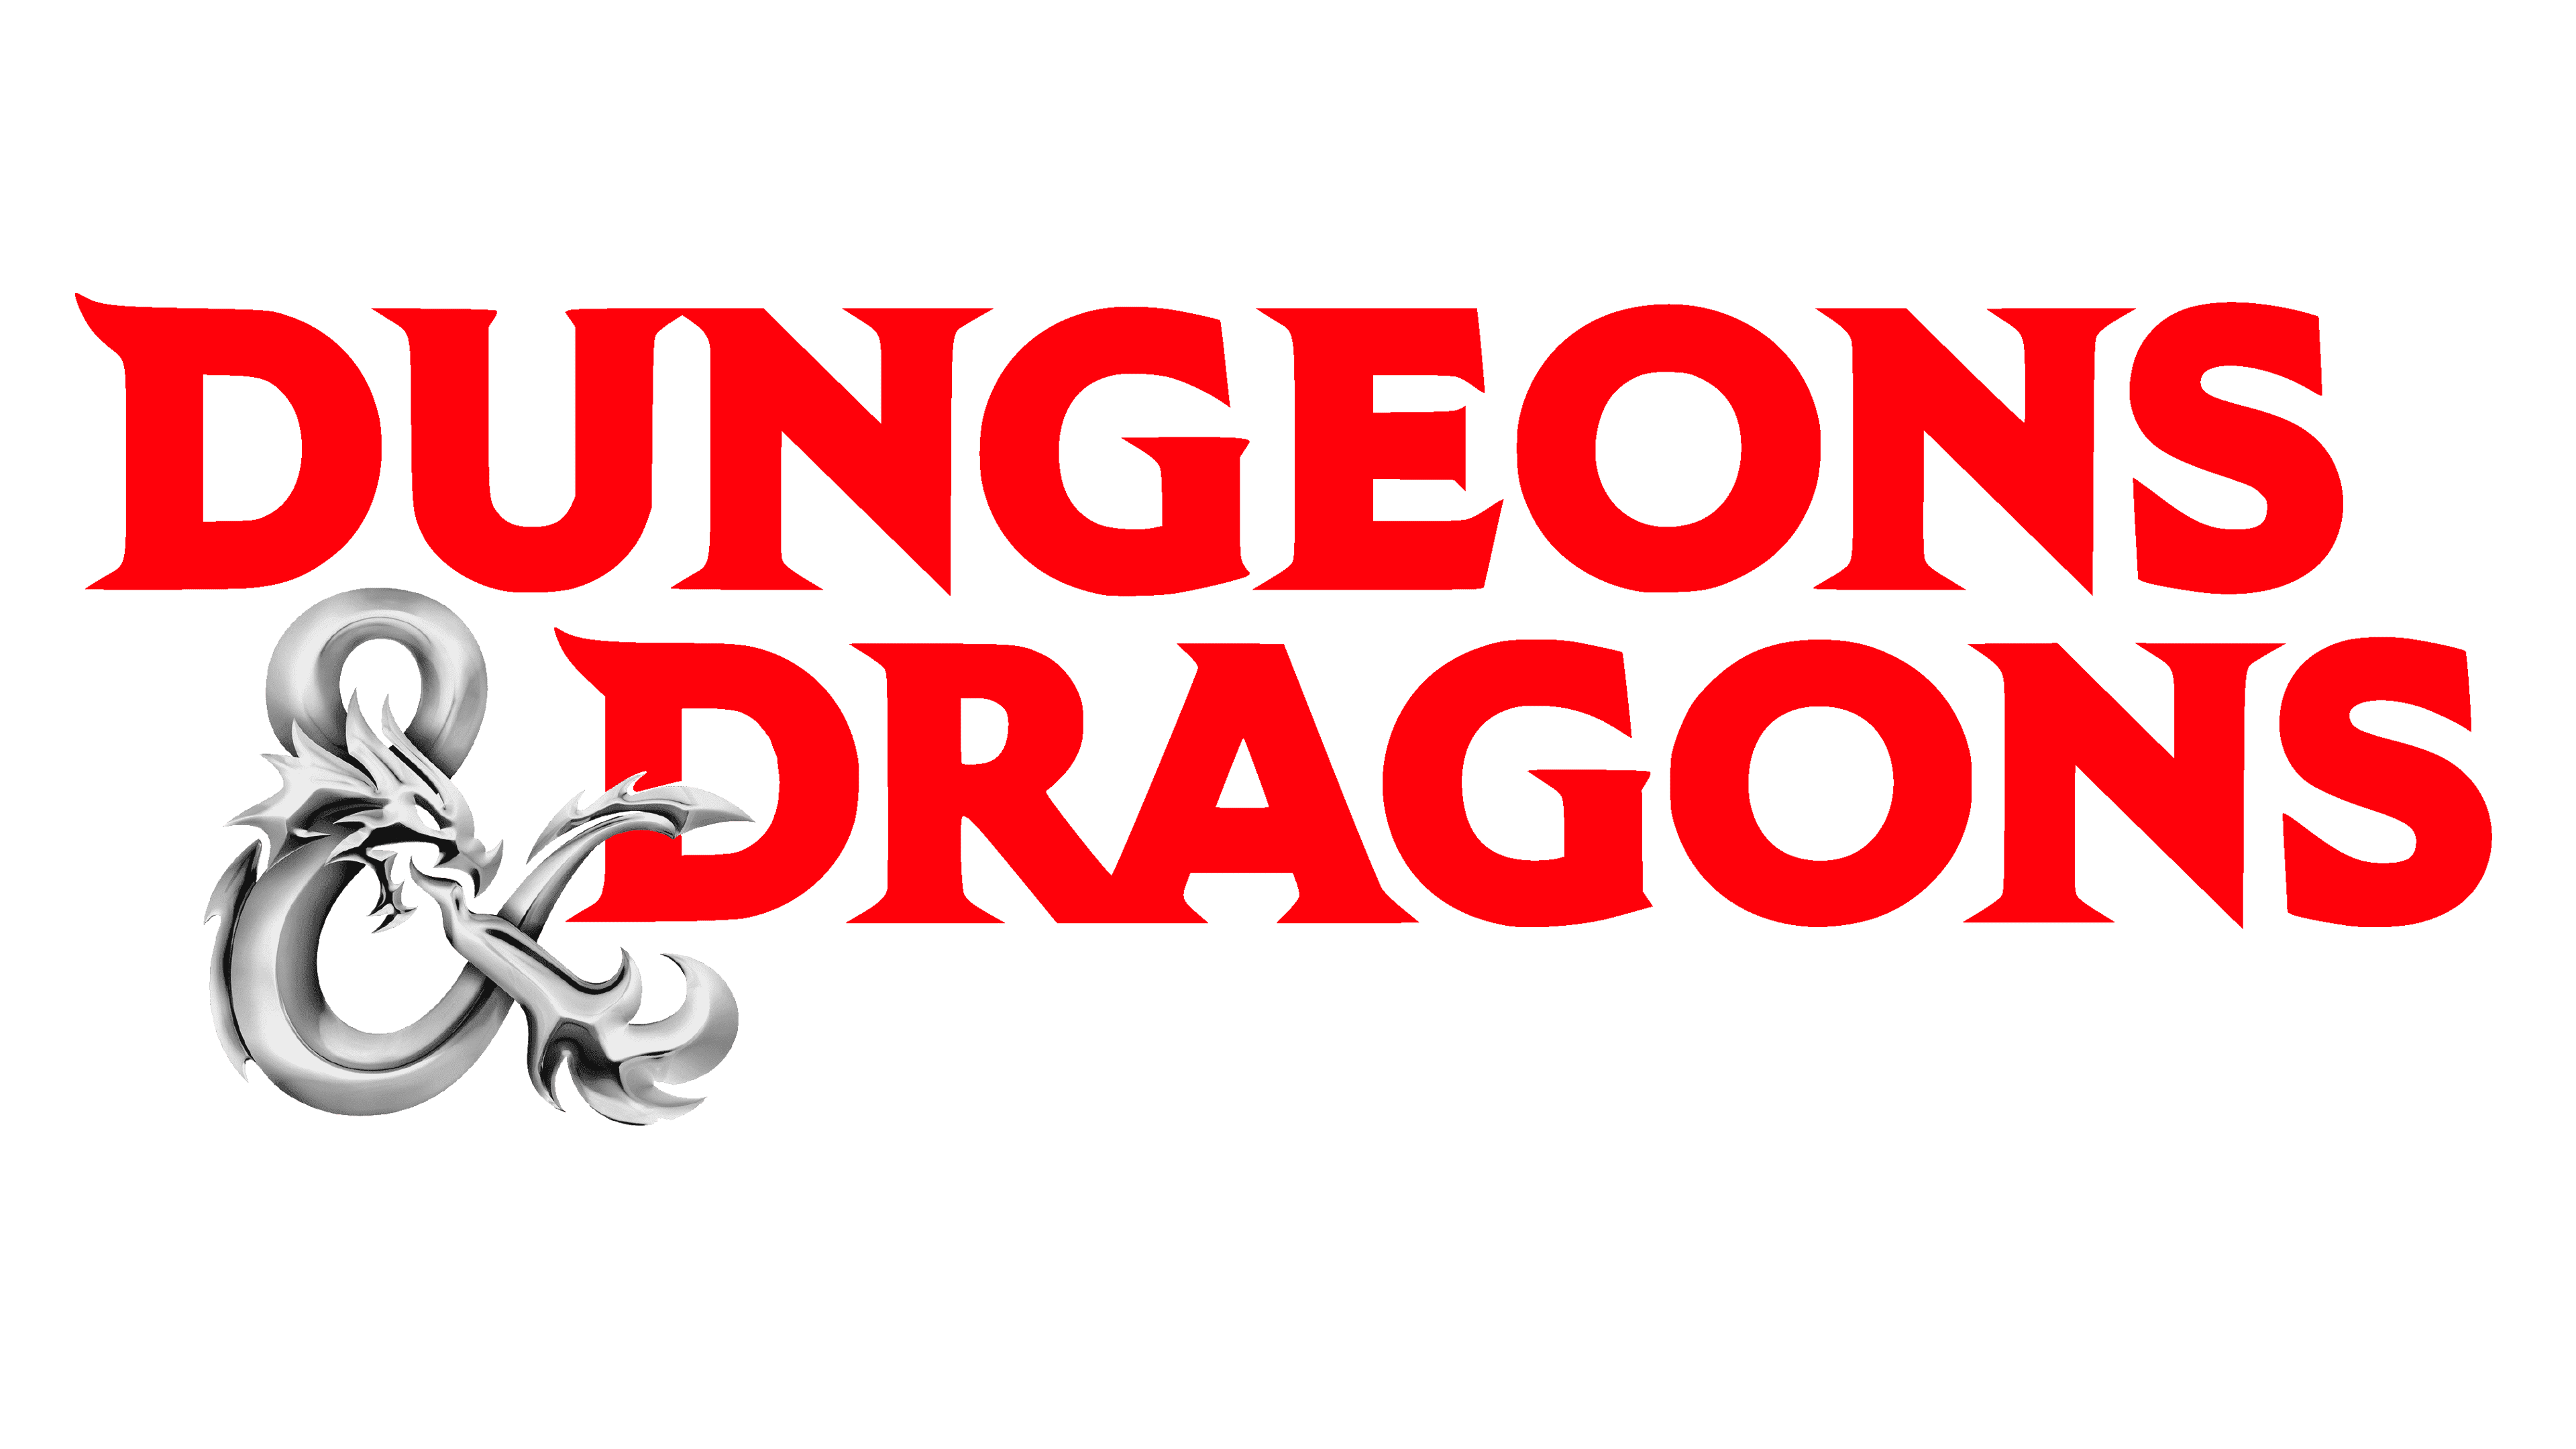 The logo for the Dungeons and Dragons roleplaying game.